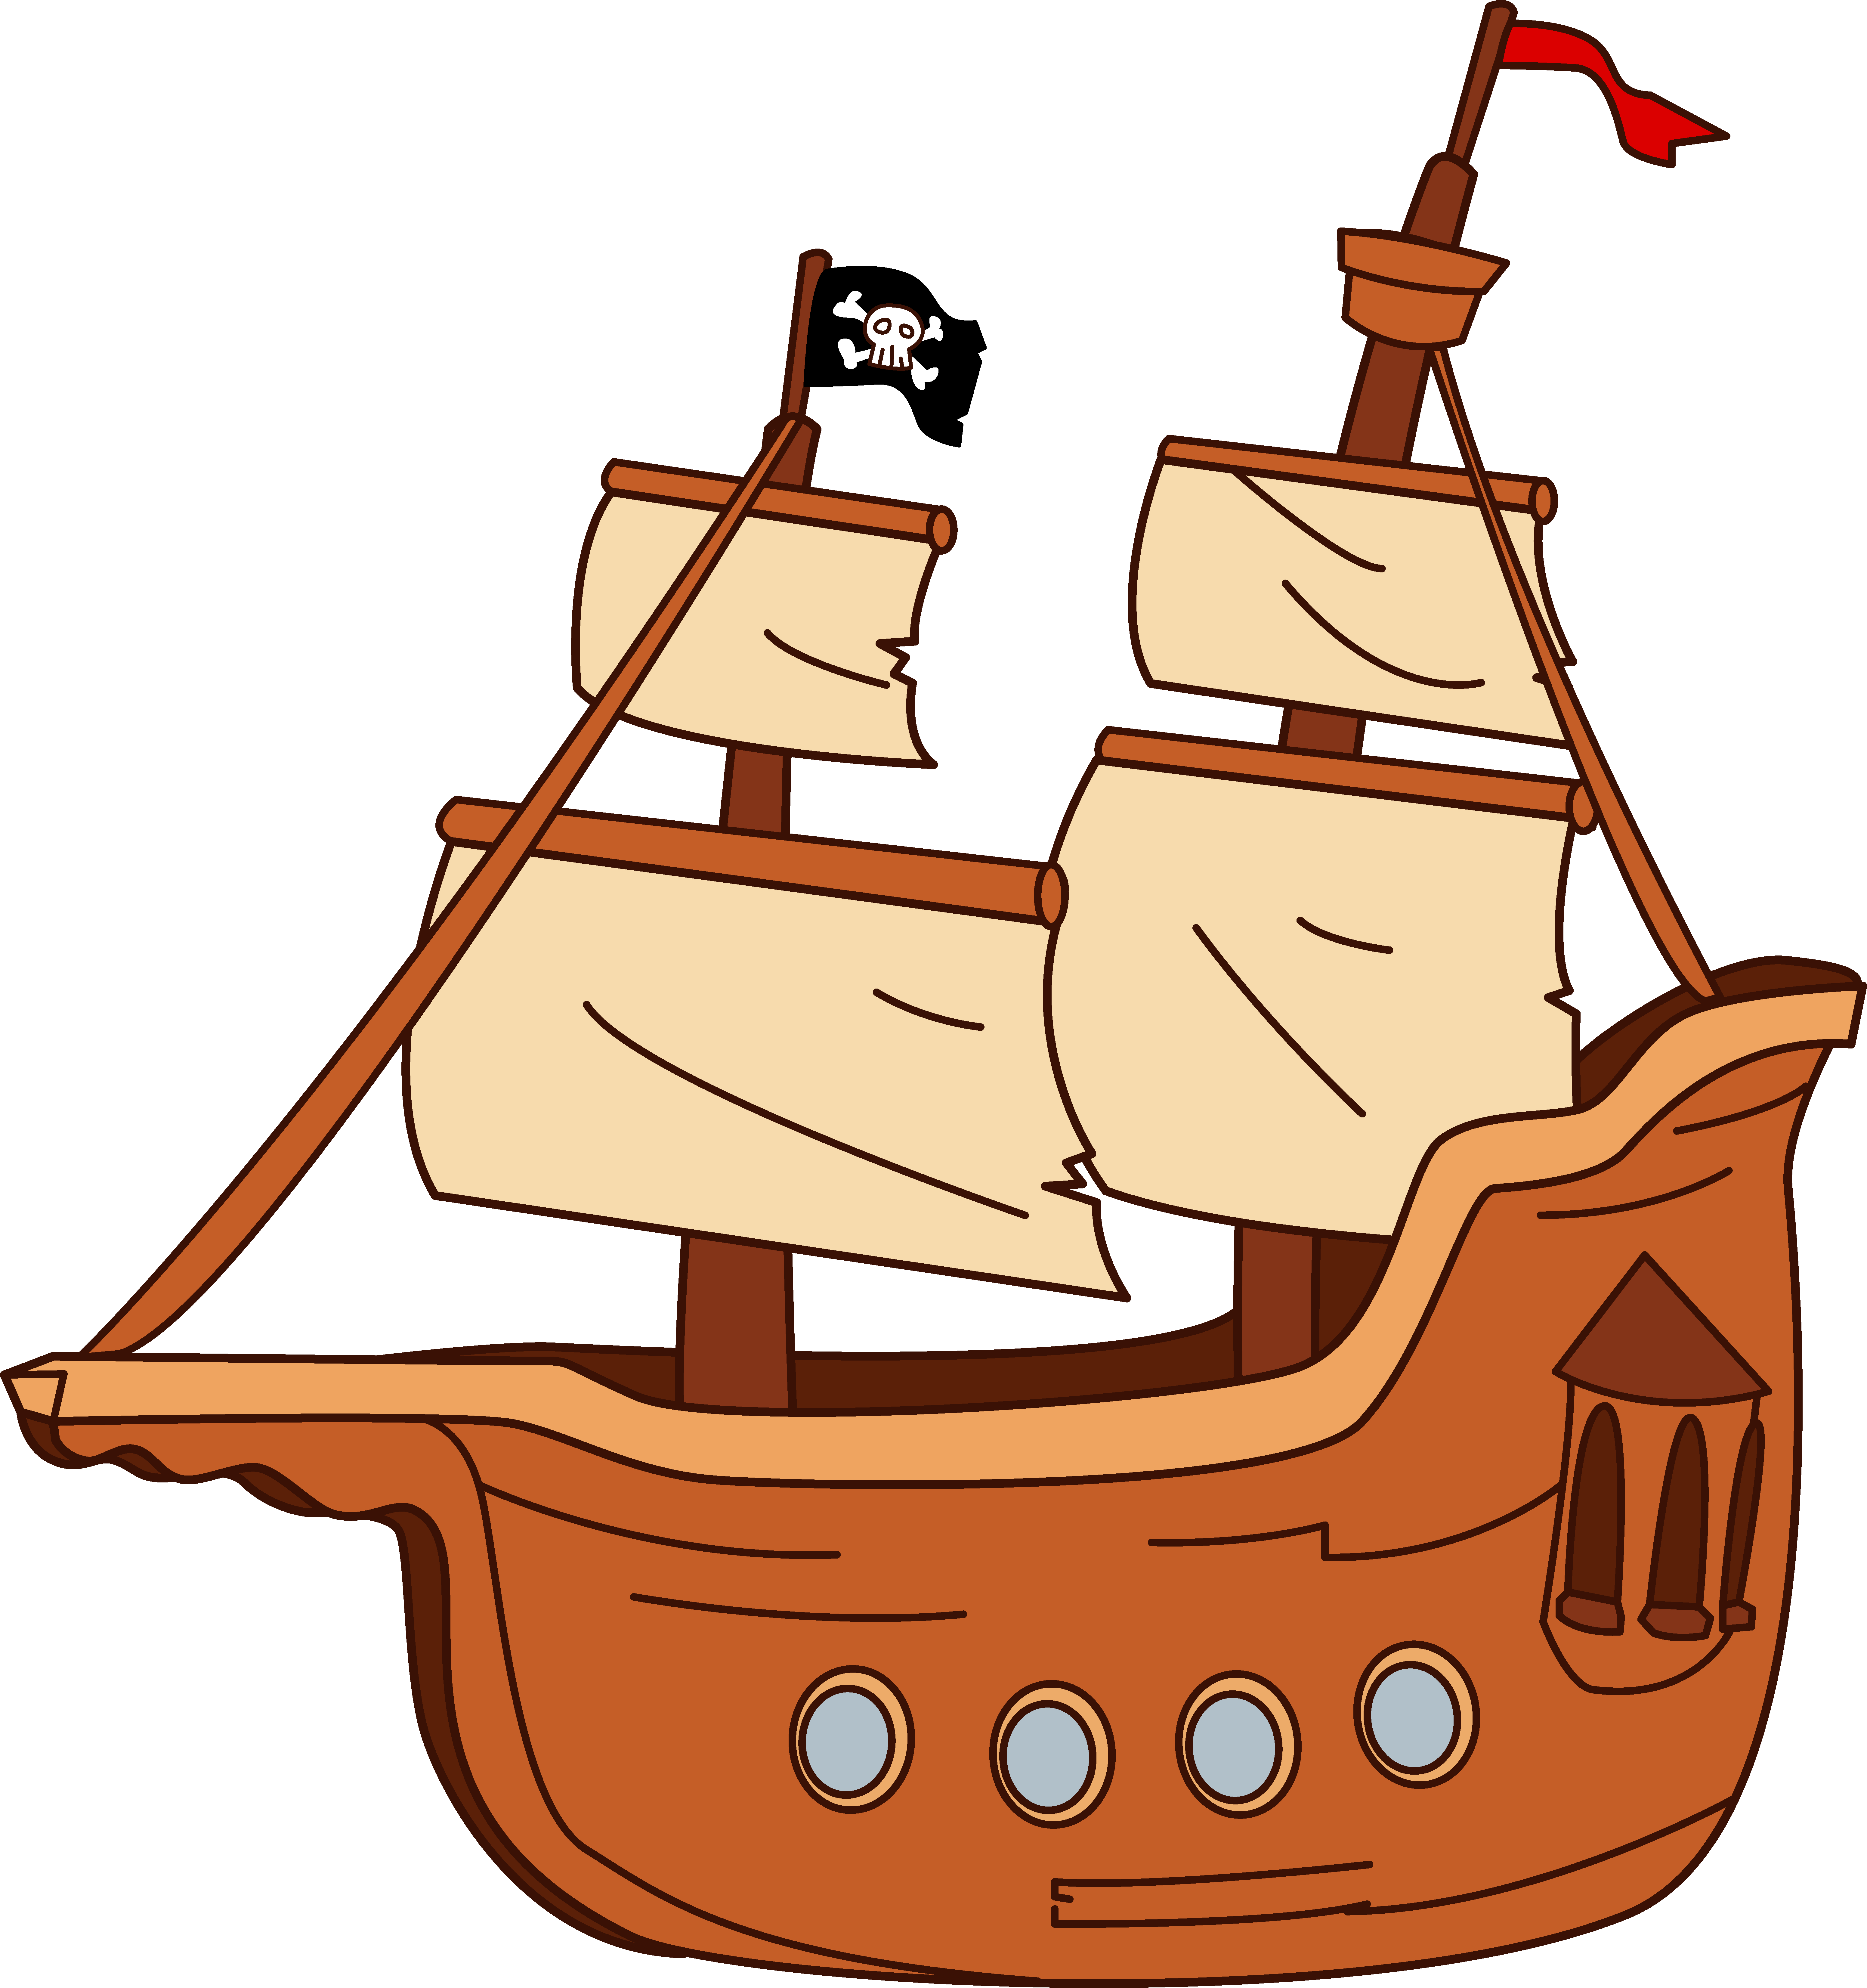 Free Cartoon Boat Png, Download Free Cartoon Boat Png png images, Free ClipArts on Clipart Library